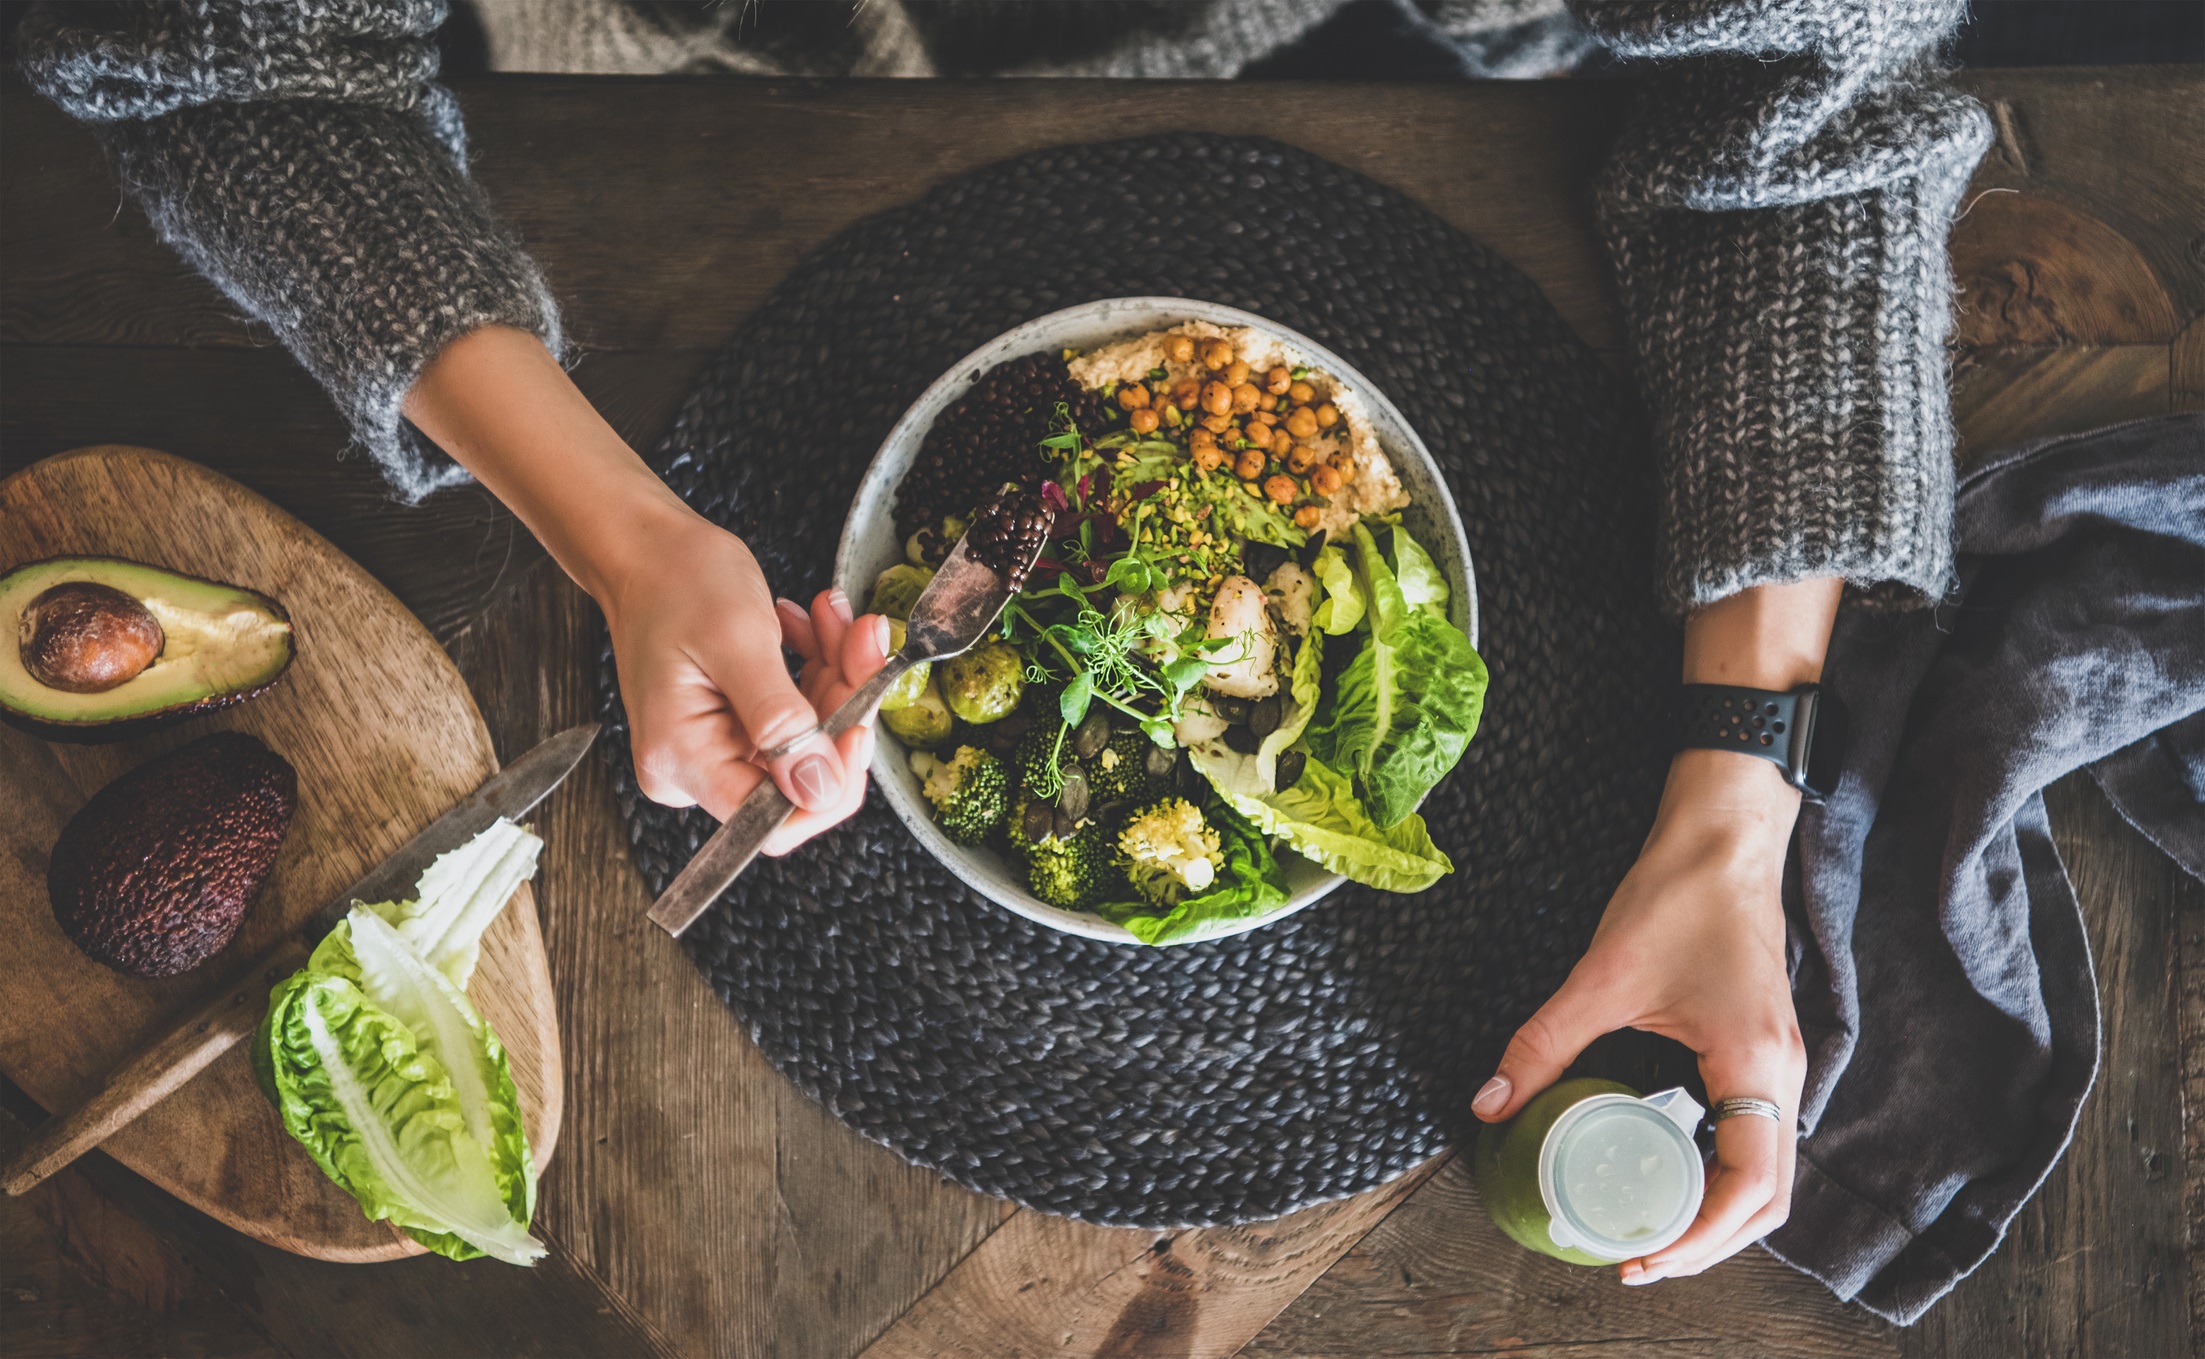 Healthy dinner, lunch setting. Flat-lay of vegan superbowl or Buddha bowl with hummus, vegetable, salad, beans, couscous and avocado, green smoothie and woman's hands over wooden table, top view